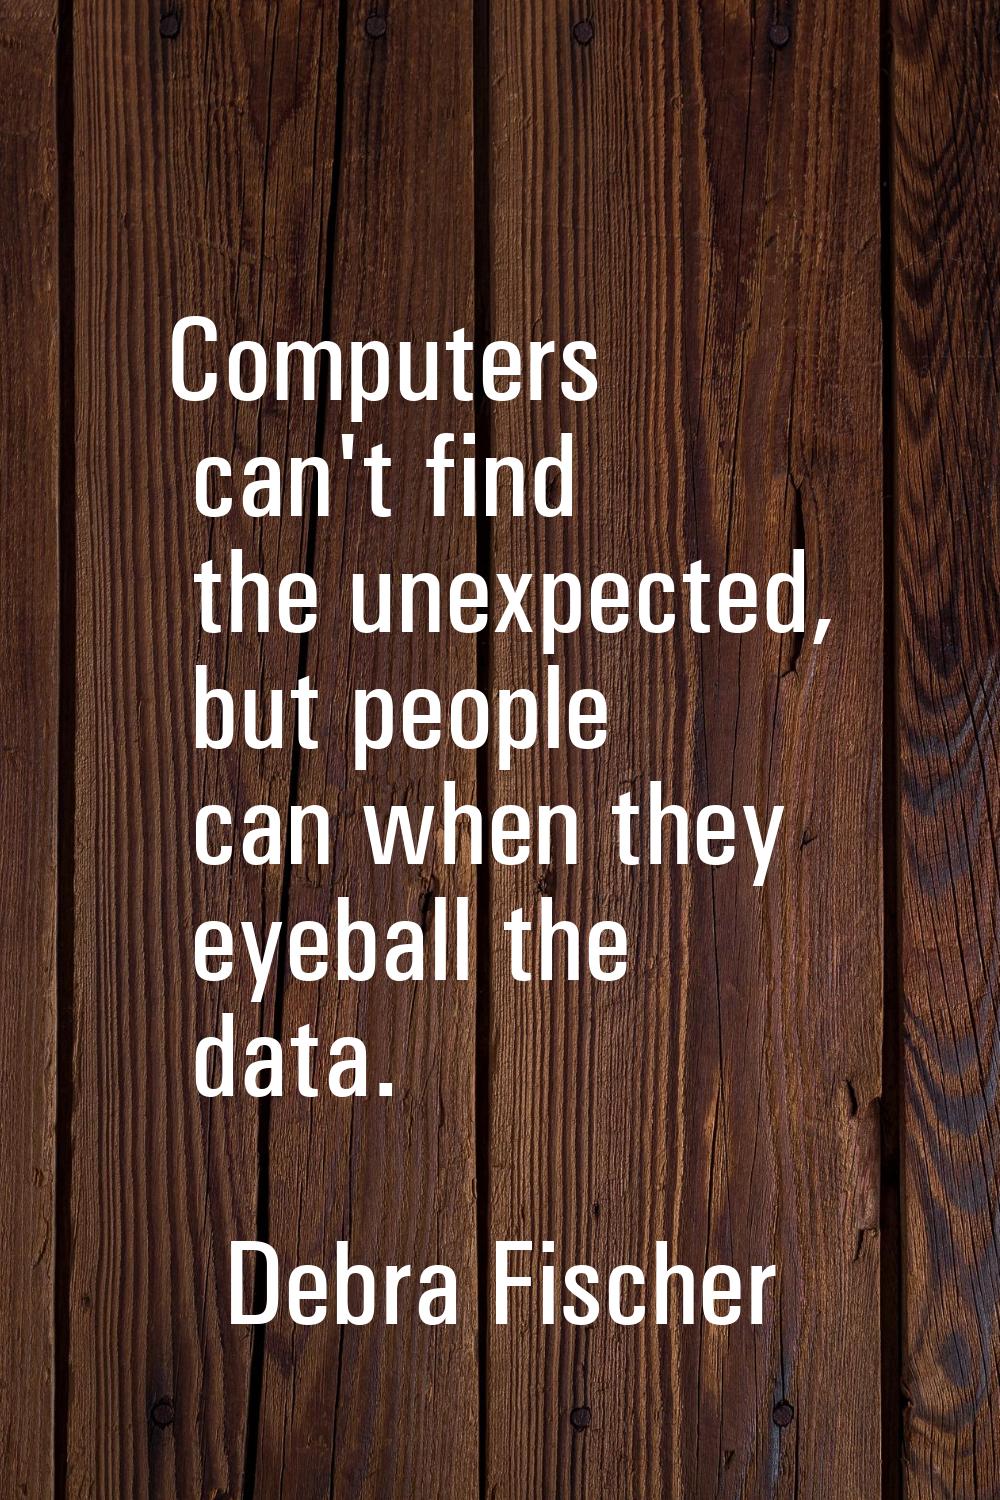 Computers can't find the unexpected, but people can when they eyeball the data.